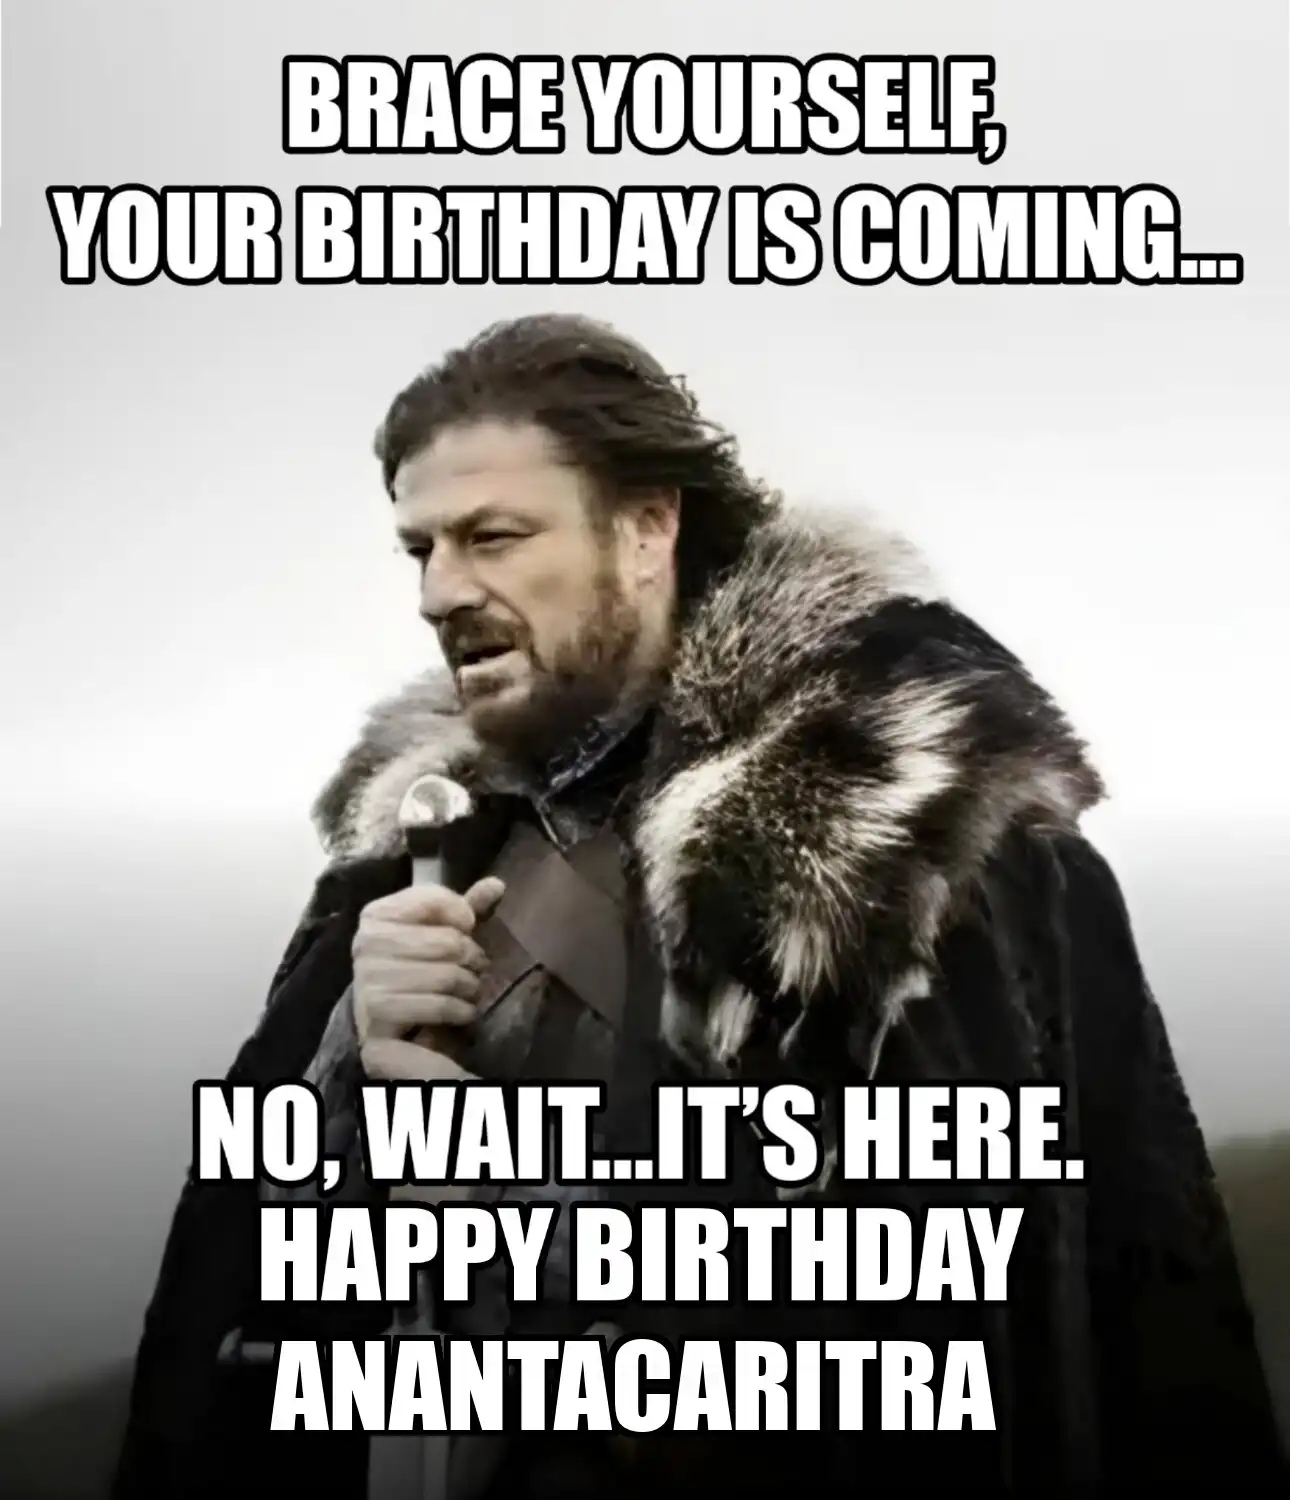 Happy Birthday Anantacaritra Brace Yourself Your Birthday Is Coming Meme